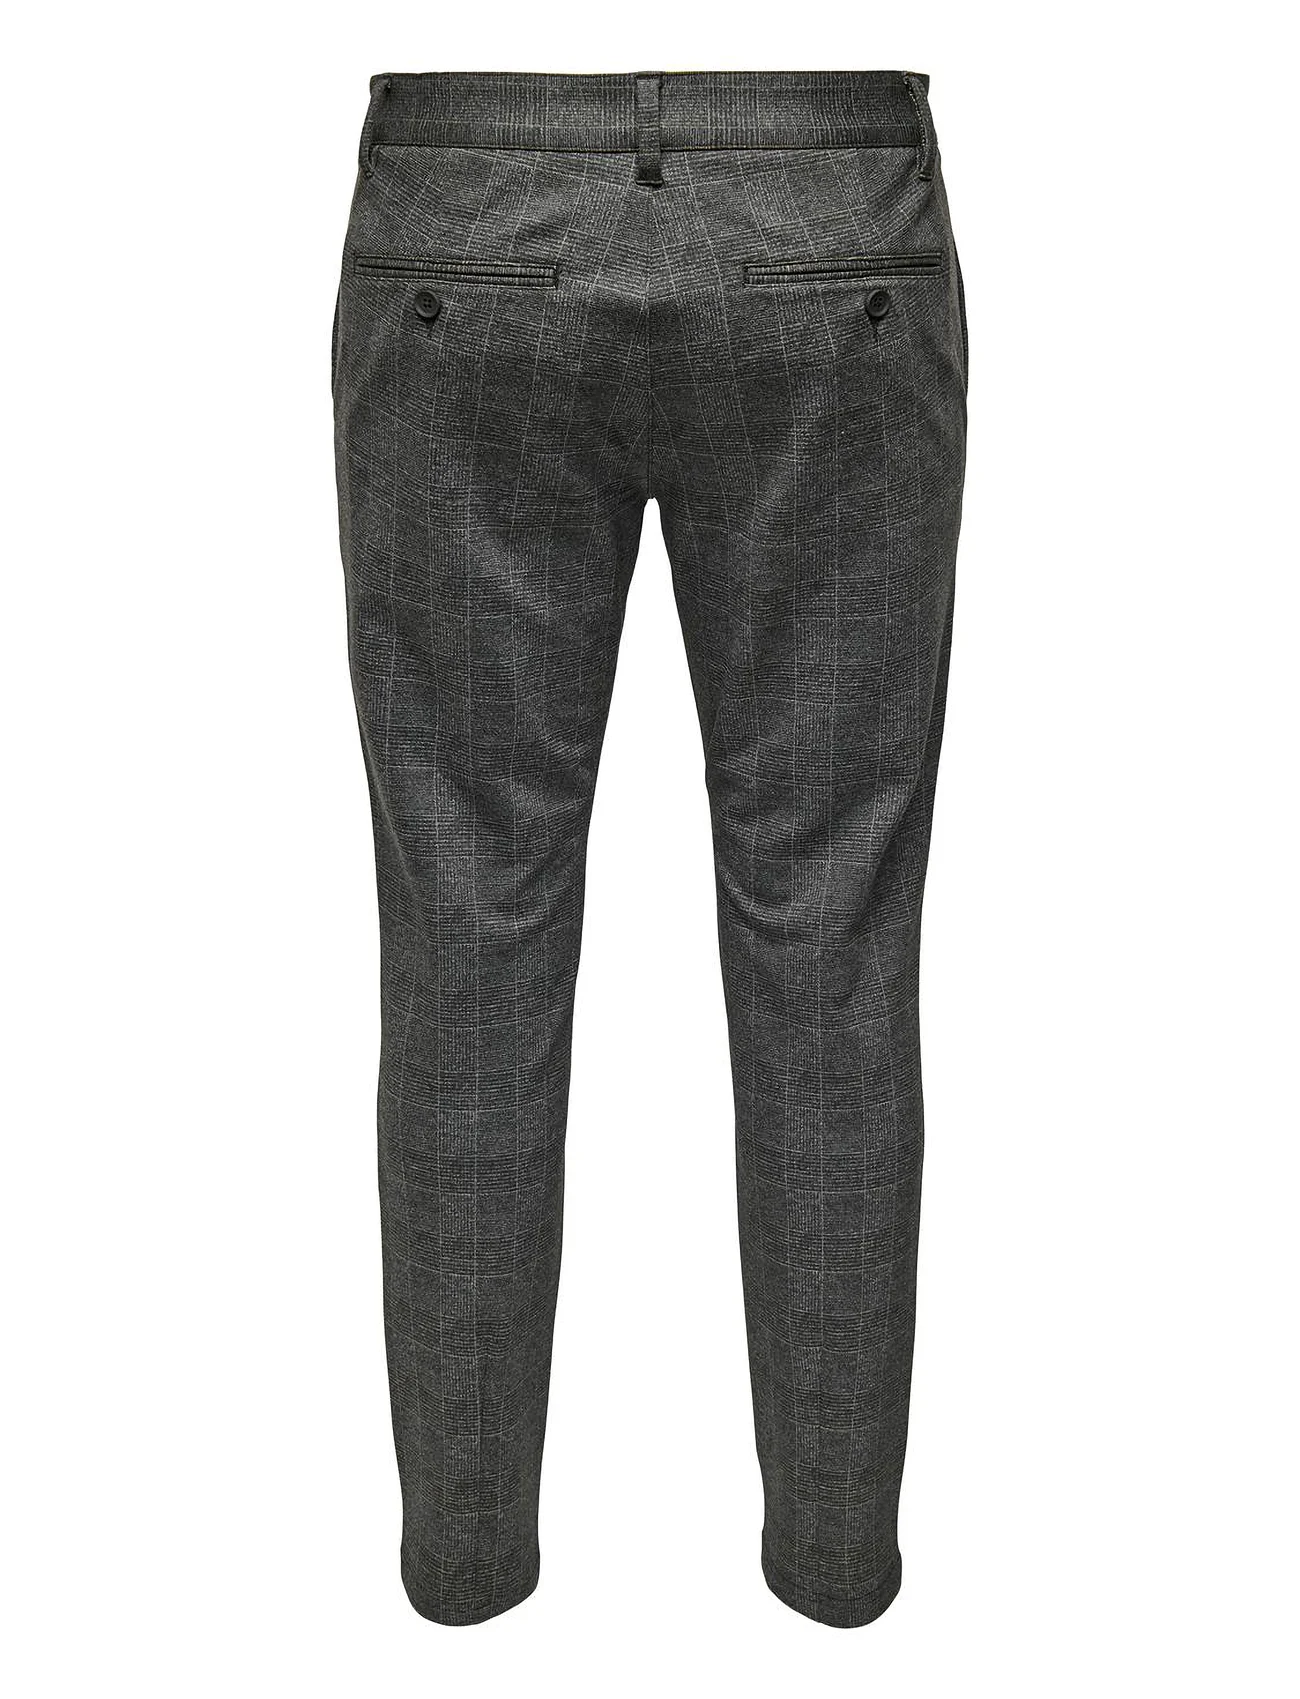 ONLY & SONS - ONSMARK SLIM CHECK PANTS 9887 NOOS - suit trousers - black - 0